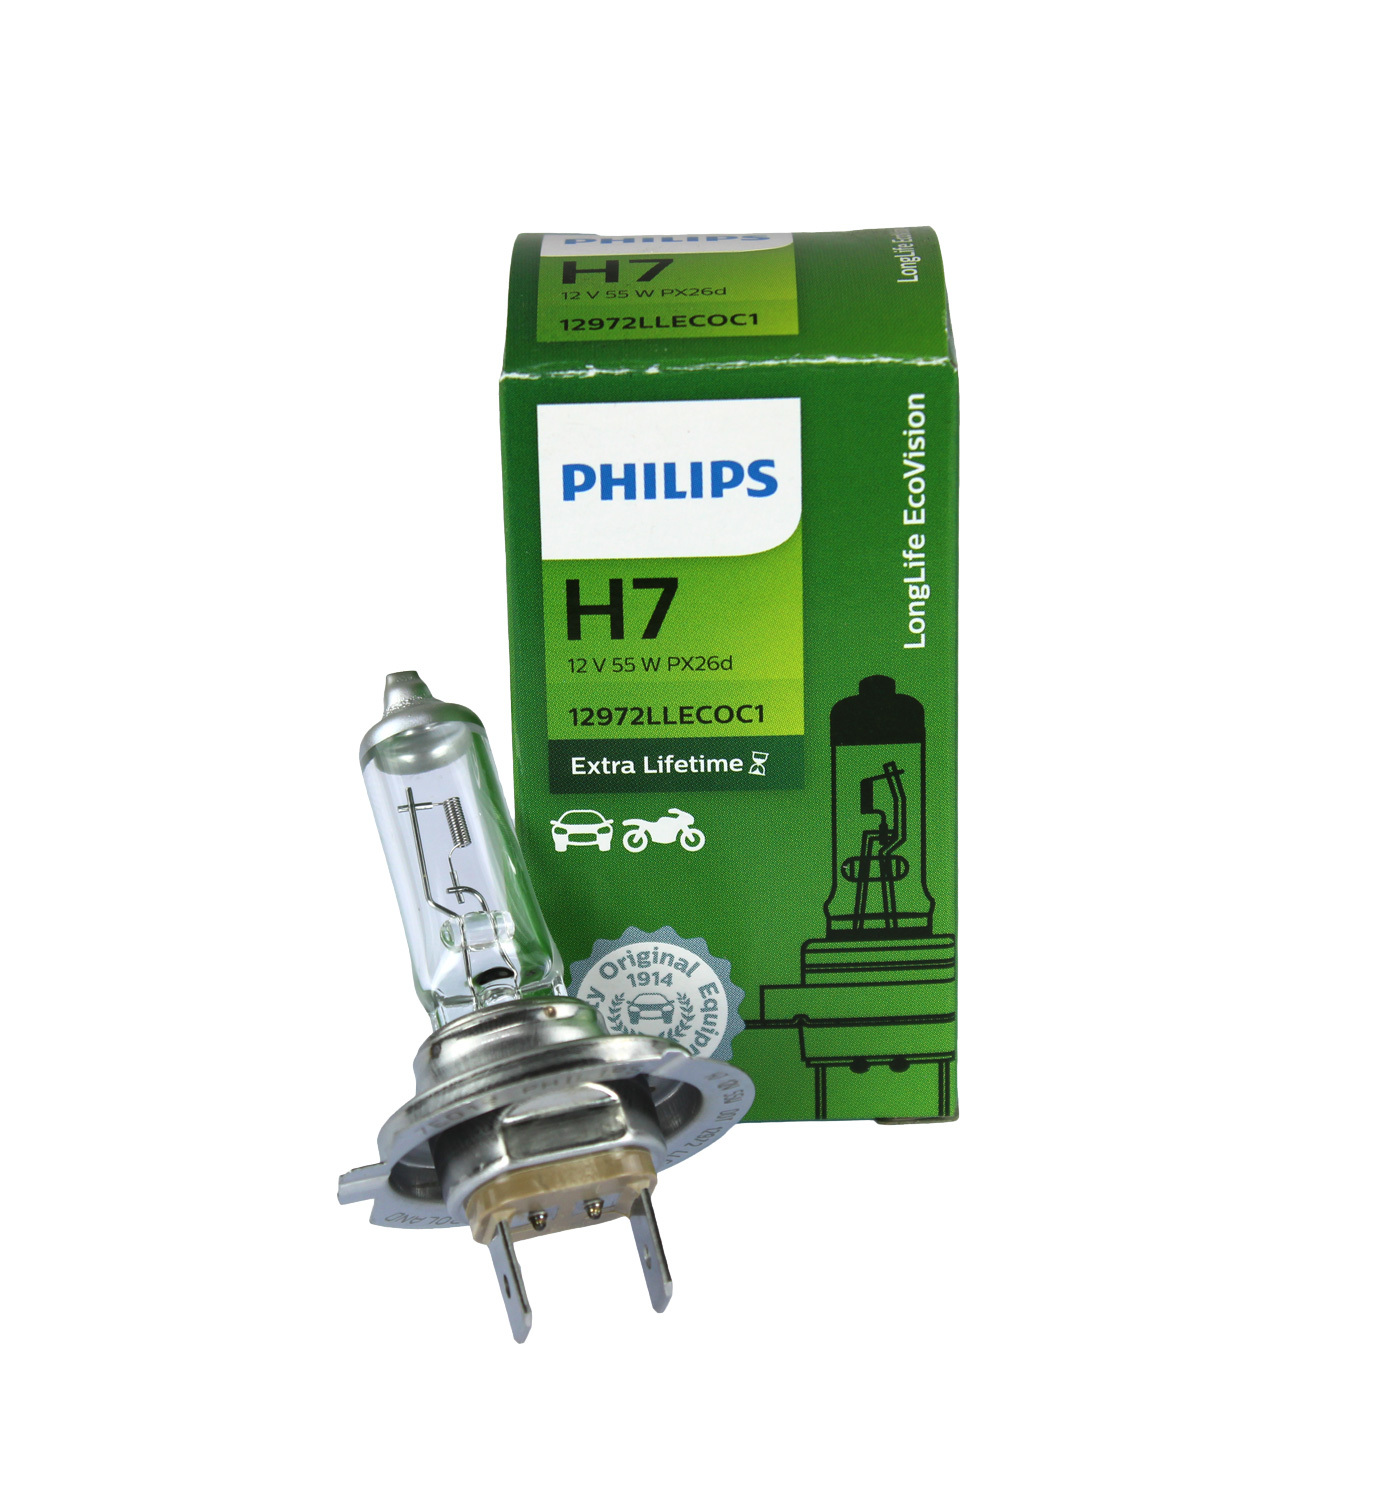 Philips LongLife Eco Vision H7 12V 55W PX26d 12972LLECOB1 Car